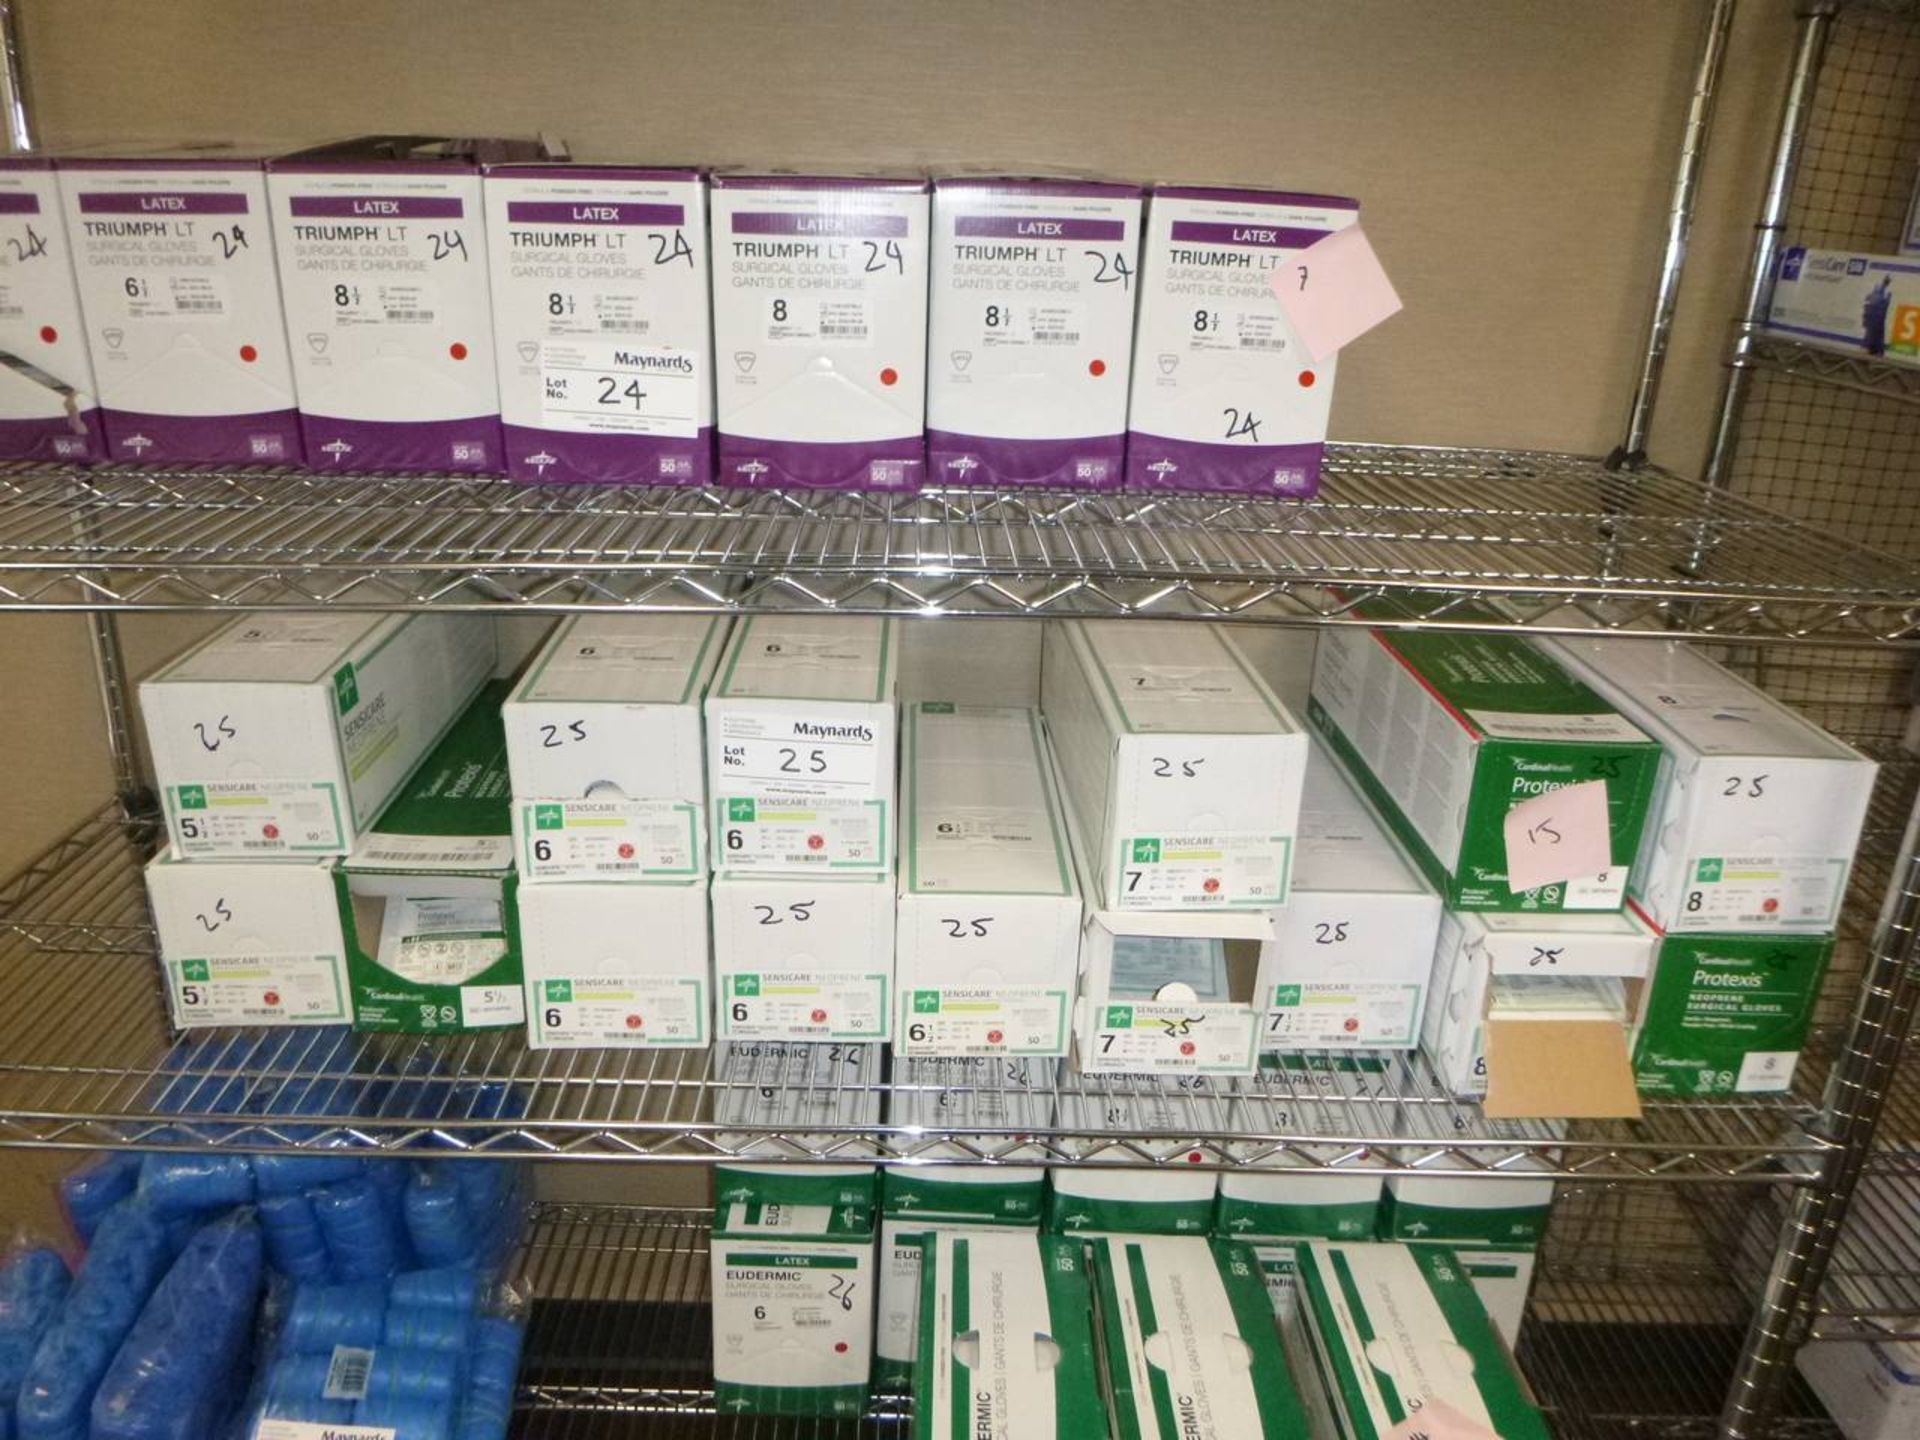 Sensicare Boxes of surgical gloves 5 1/2-8